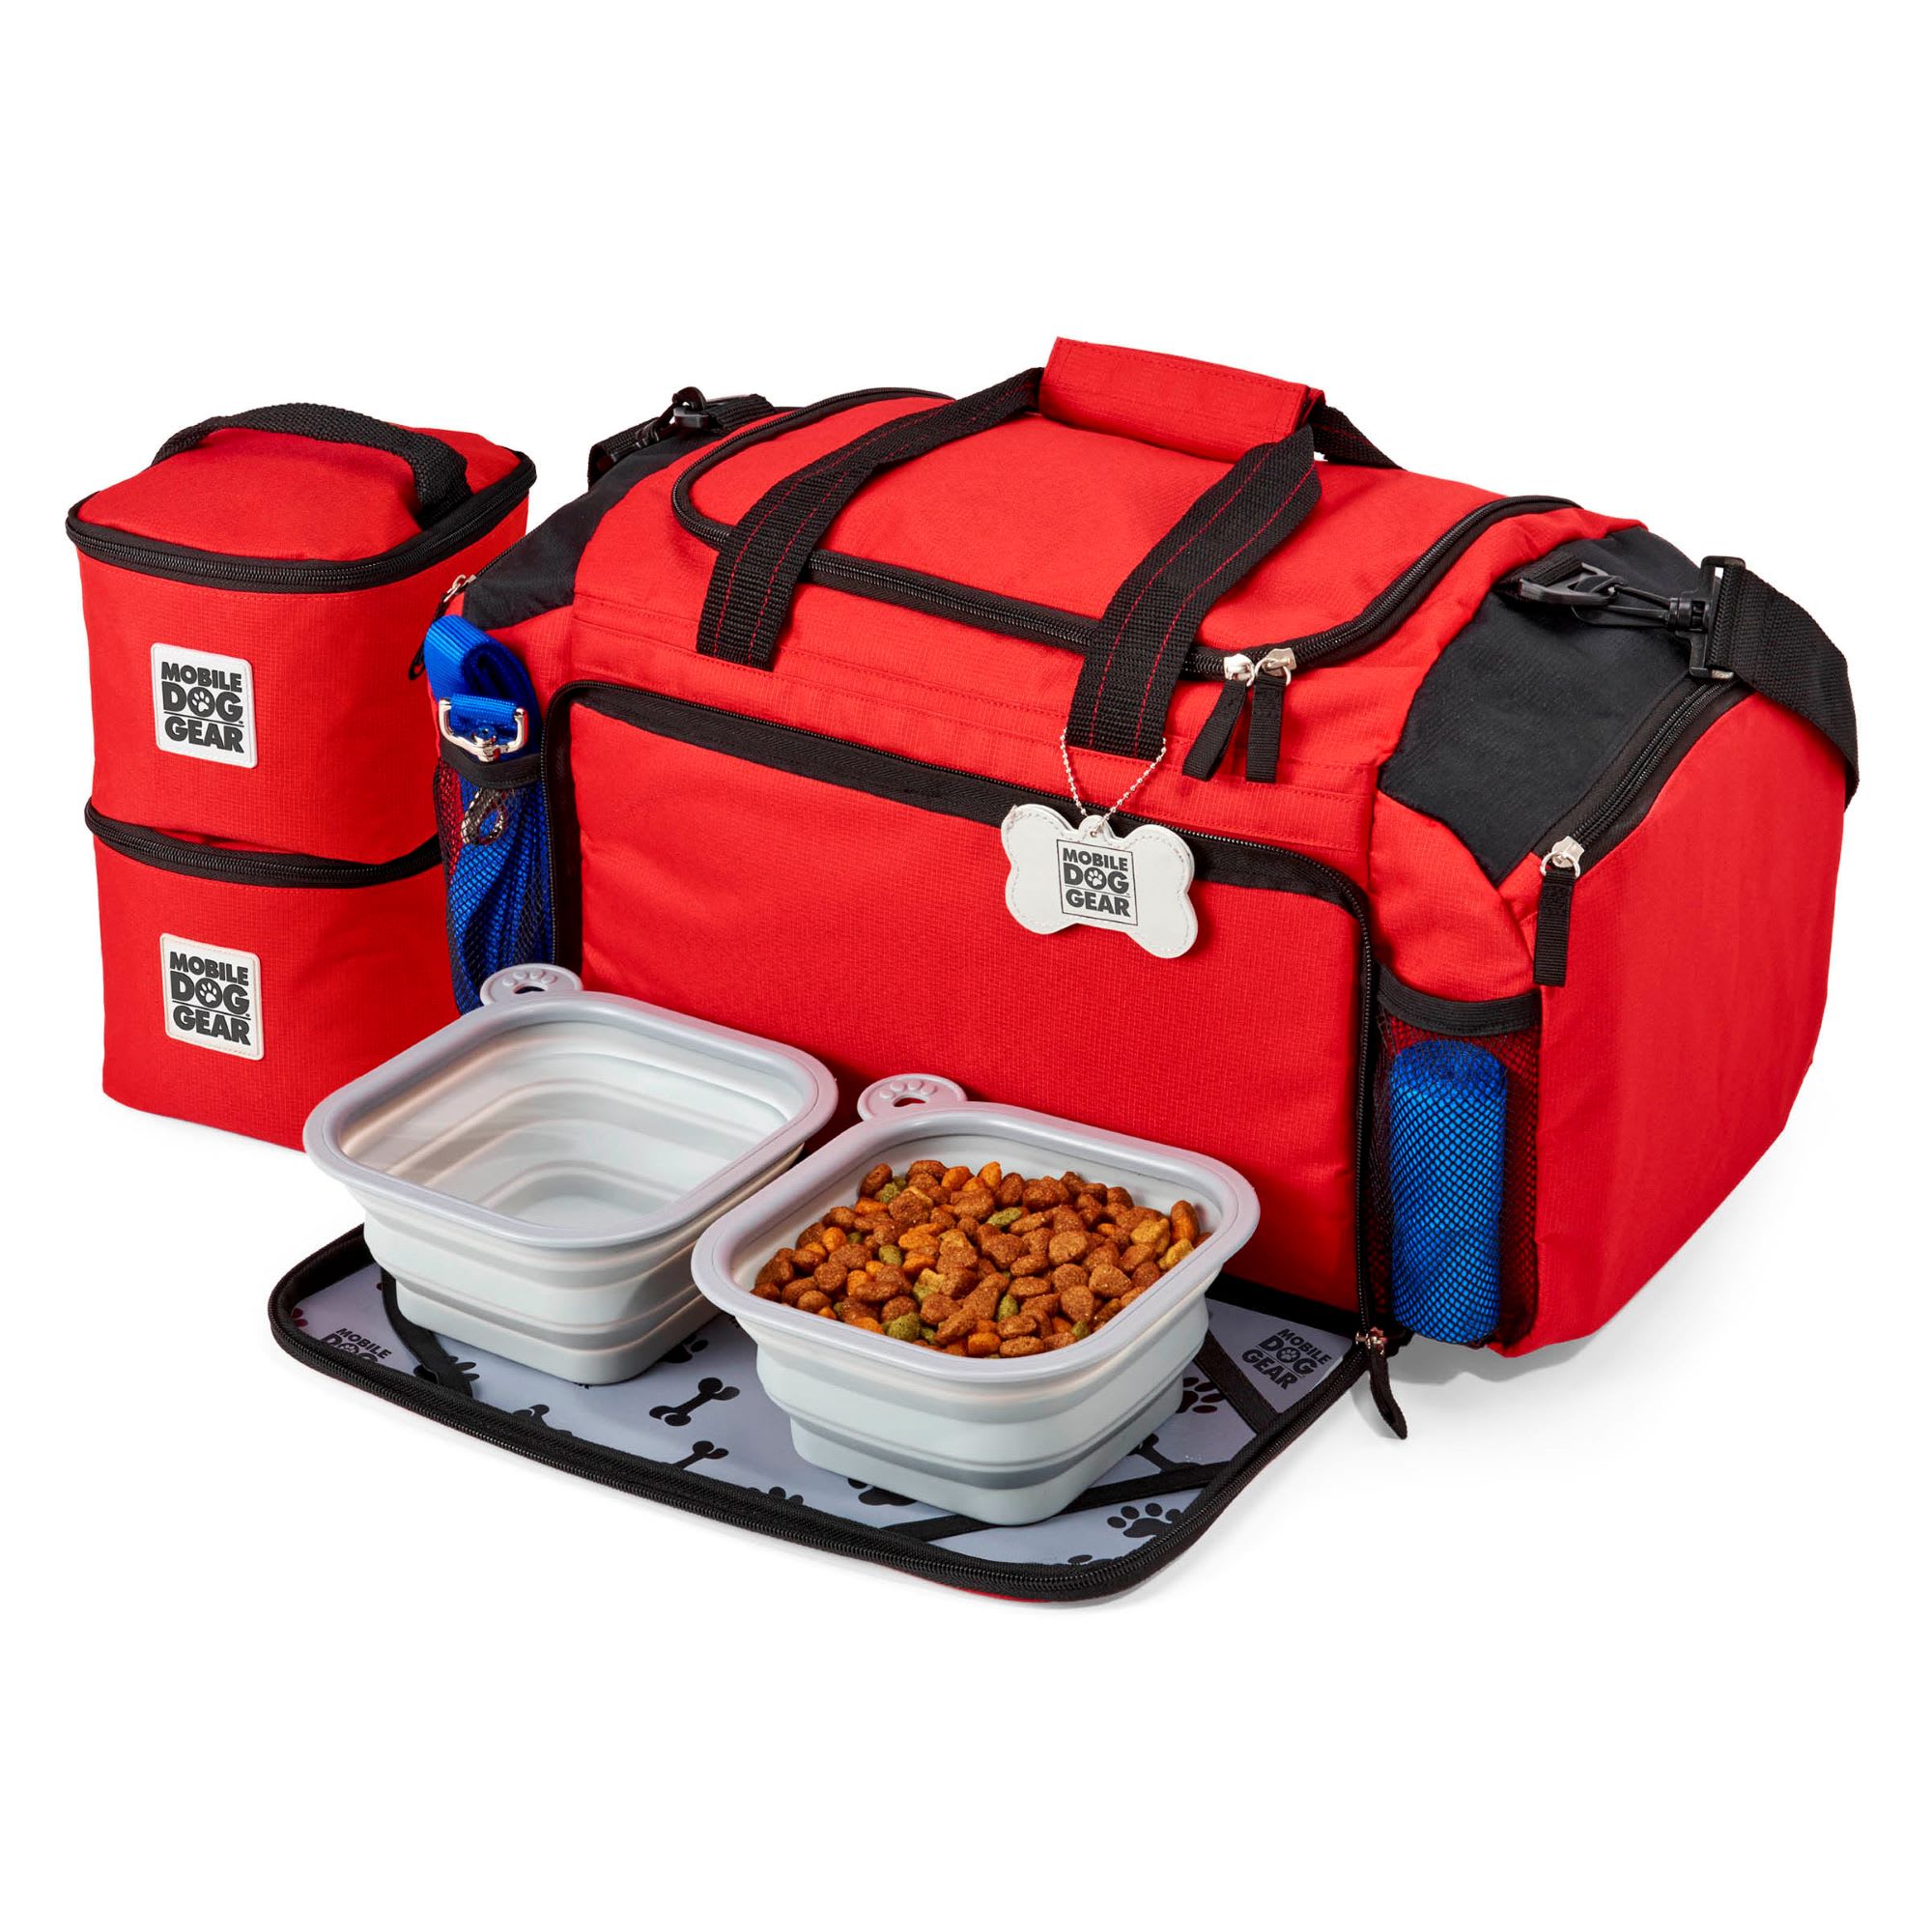 Photos - Backpack Mobile Dog Gear Mobile Dog Gear Red Ultimate Week Away Duffle, 3.1 LBS, Re